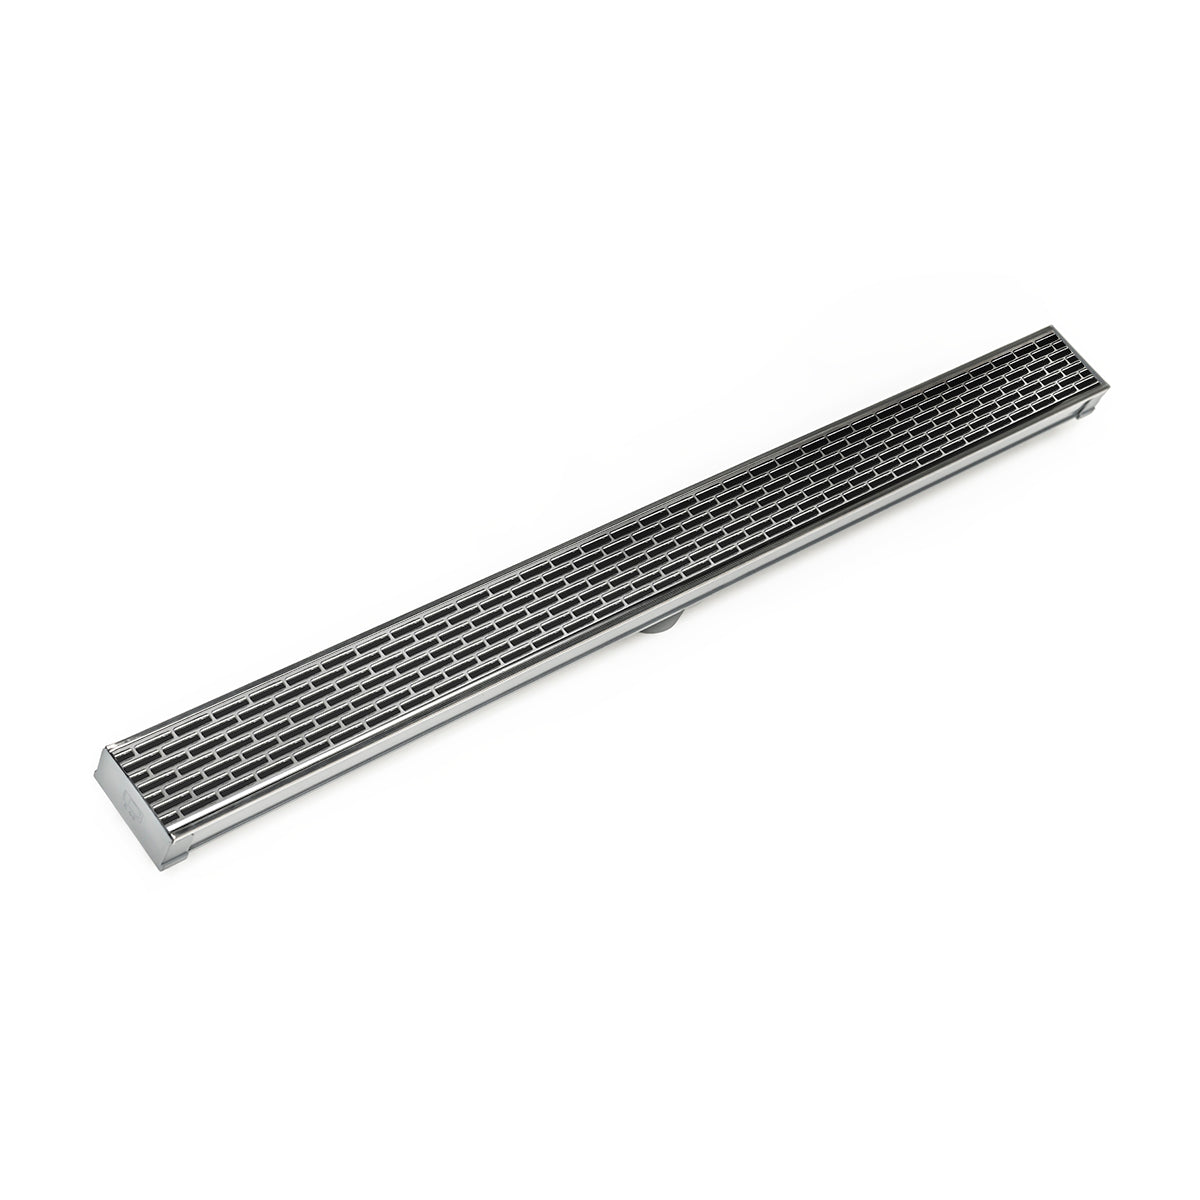 Infinity Drain 36" S-PVC Series Low Profile Site Sizable Linear Drain Kit with 2 1/2" Perforated Offset Slot Grate